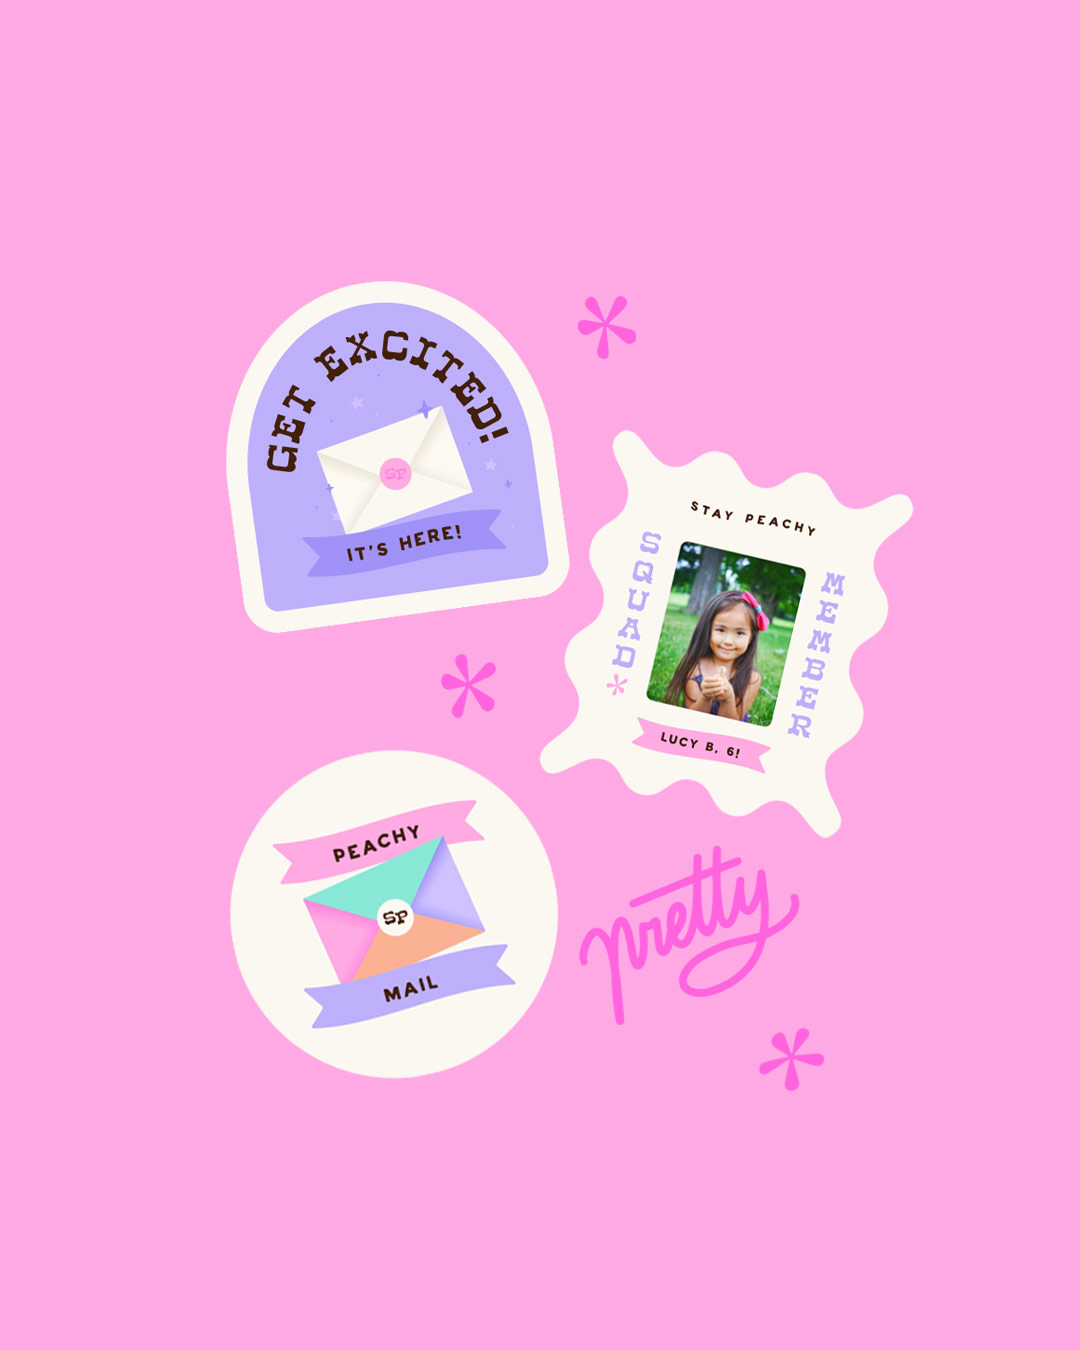 Sticker designs for Stay Peachy, an online store selling Megan Plays merchandise - designed by Wiltshire-based graphic designer, Kaye Huett